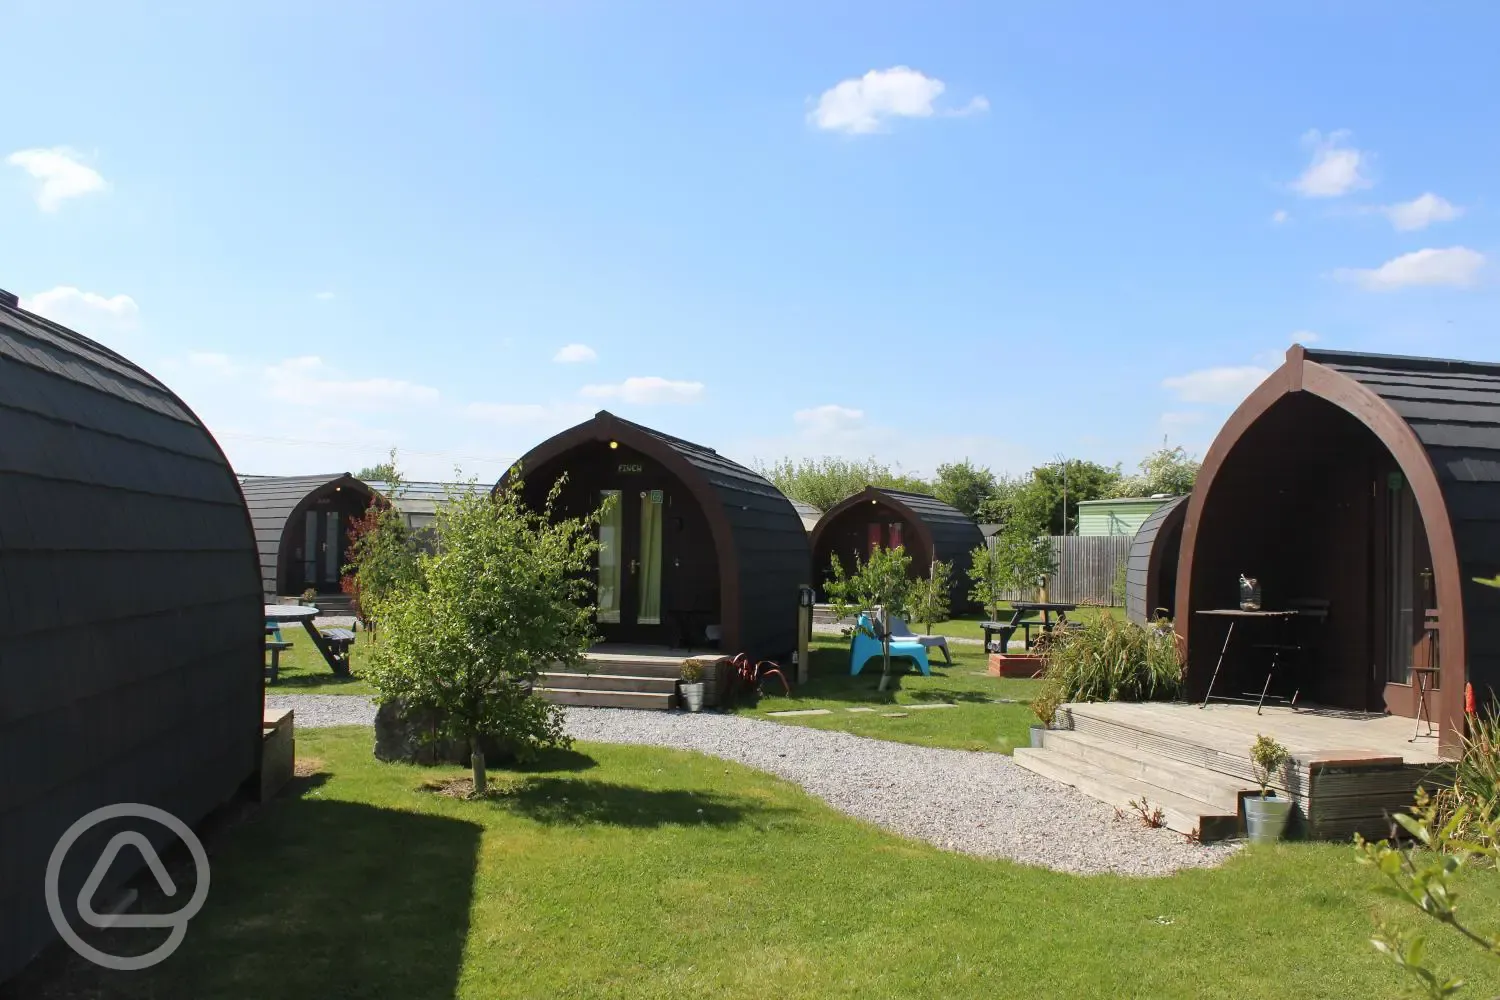 Pods with garden and picnic areas